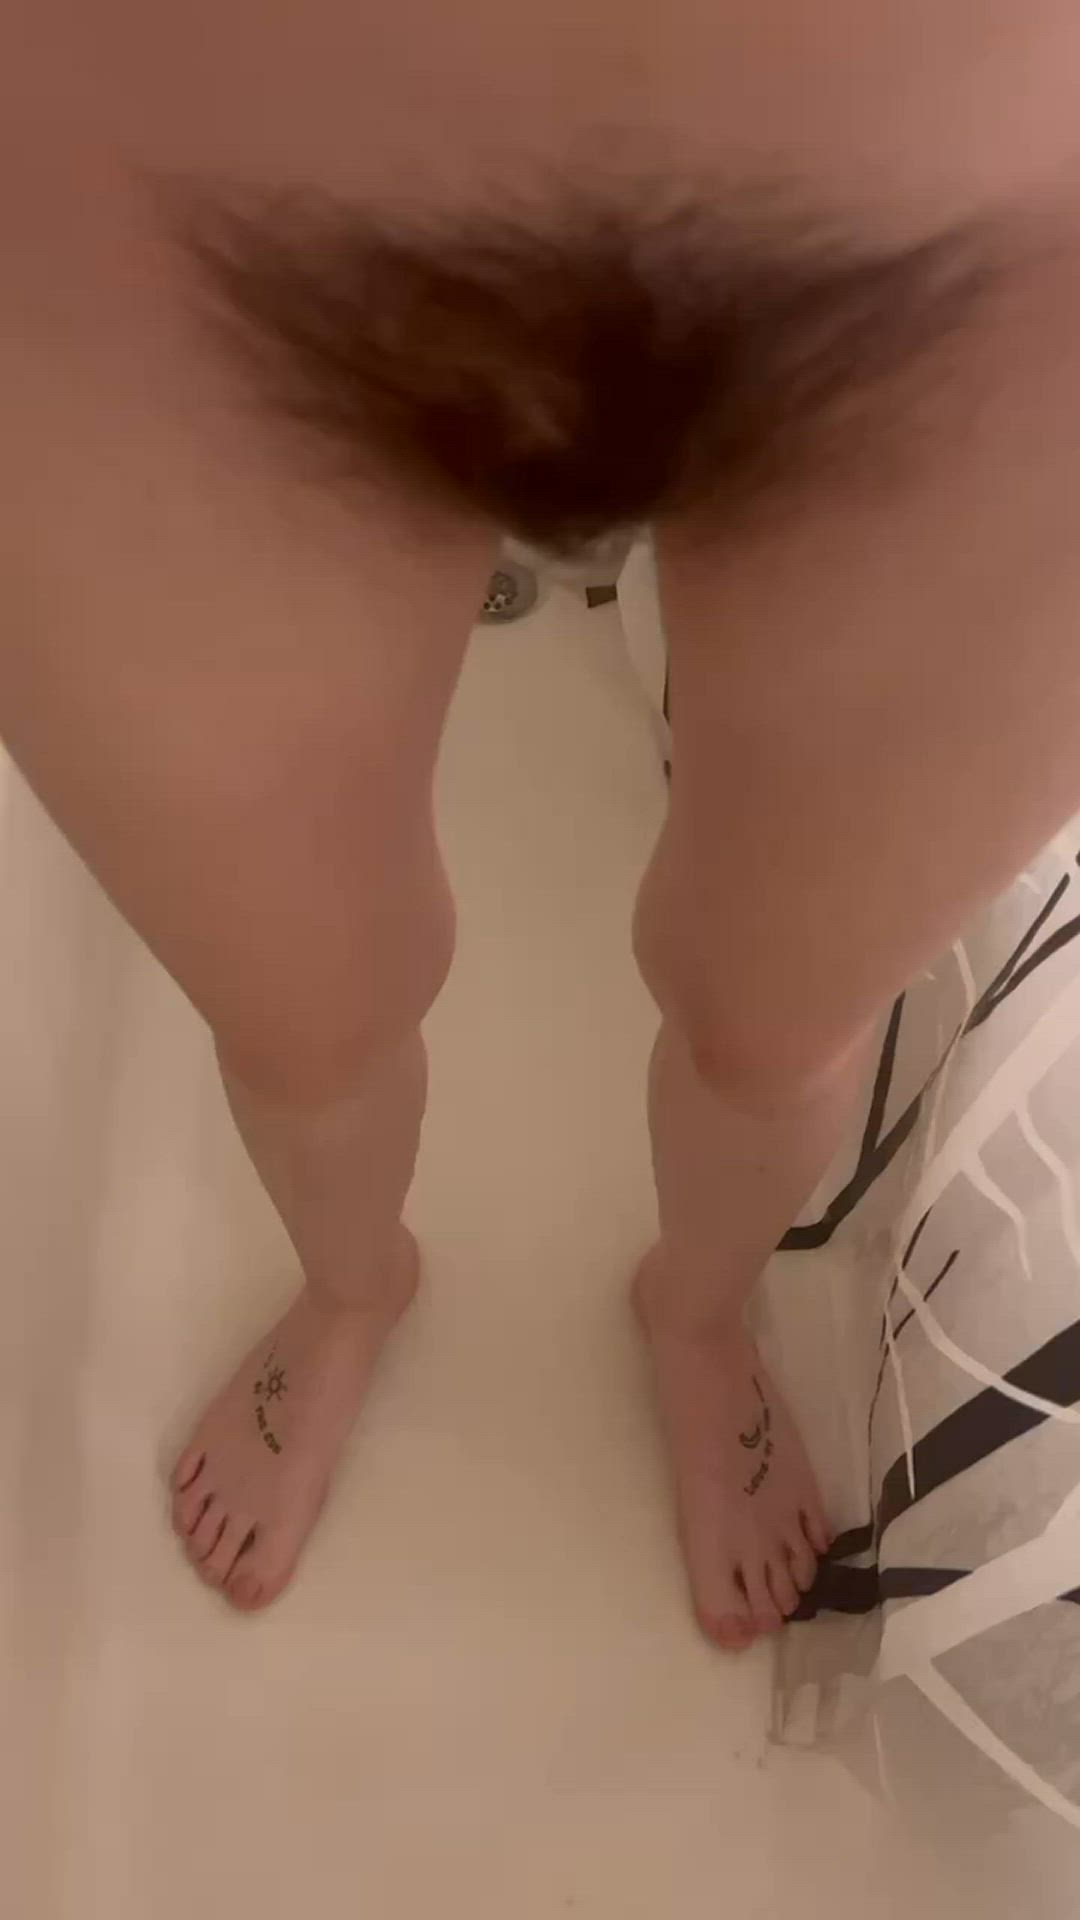 Pee porn video with onlyfans model mygirl666of <strong>@mygirl666of</strong>